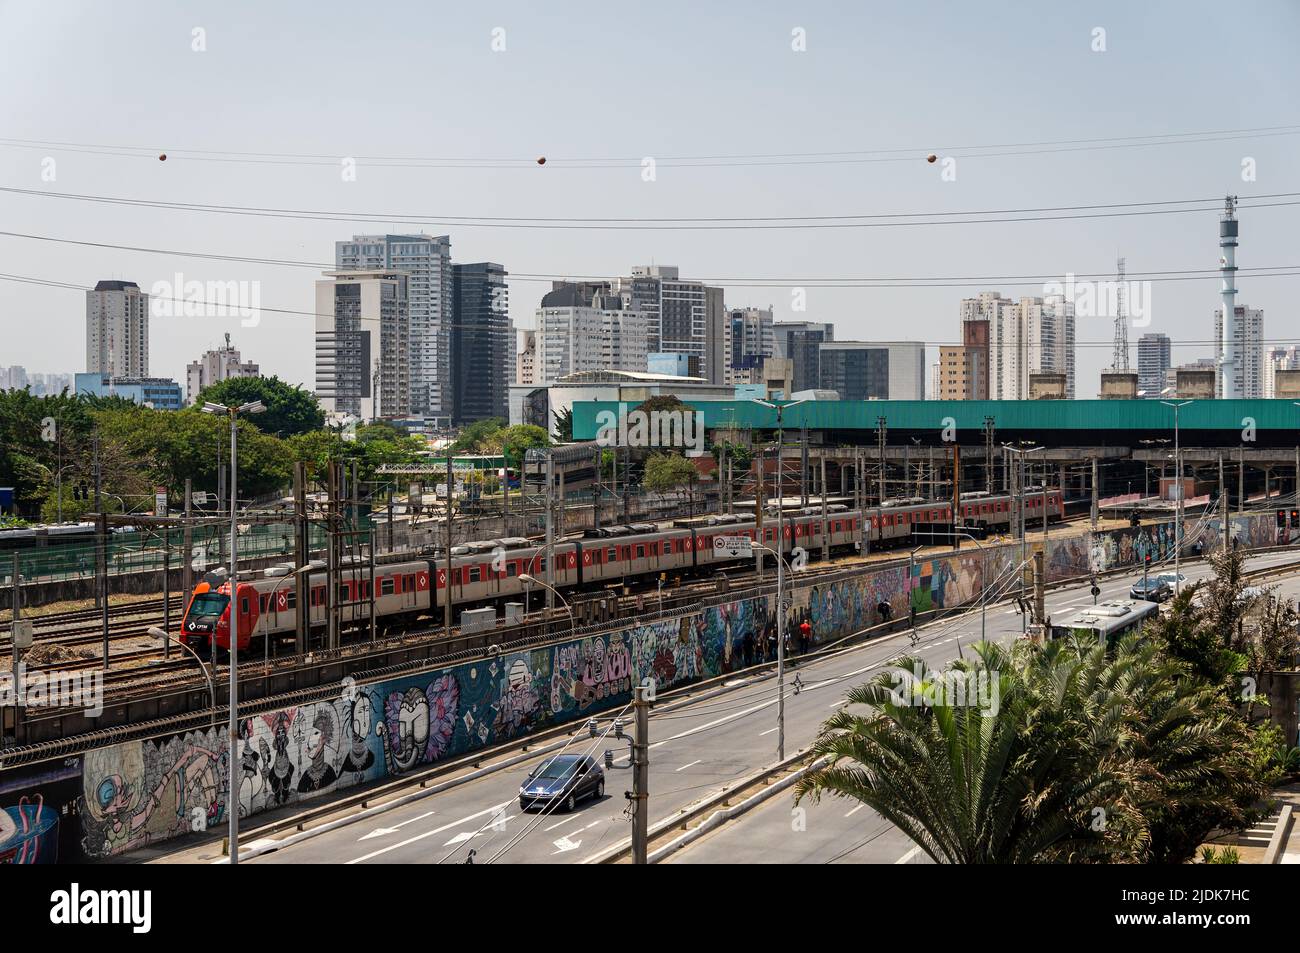 Distant view of Palmeiras-Barra Funda terminal station while a CAF Series 8000 (S080) CPTM commuter train arrives at it in a normal sunny blue sky. Stock Photo